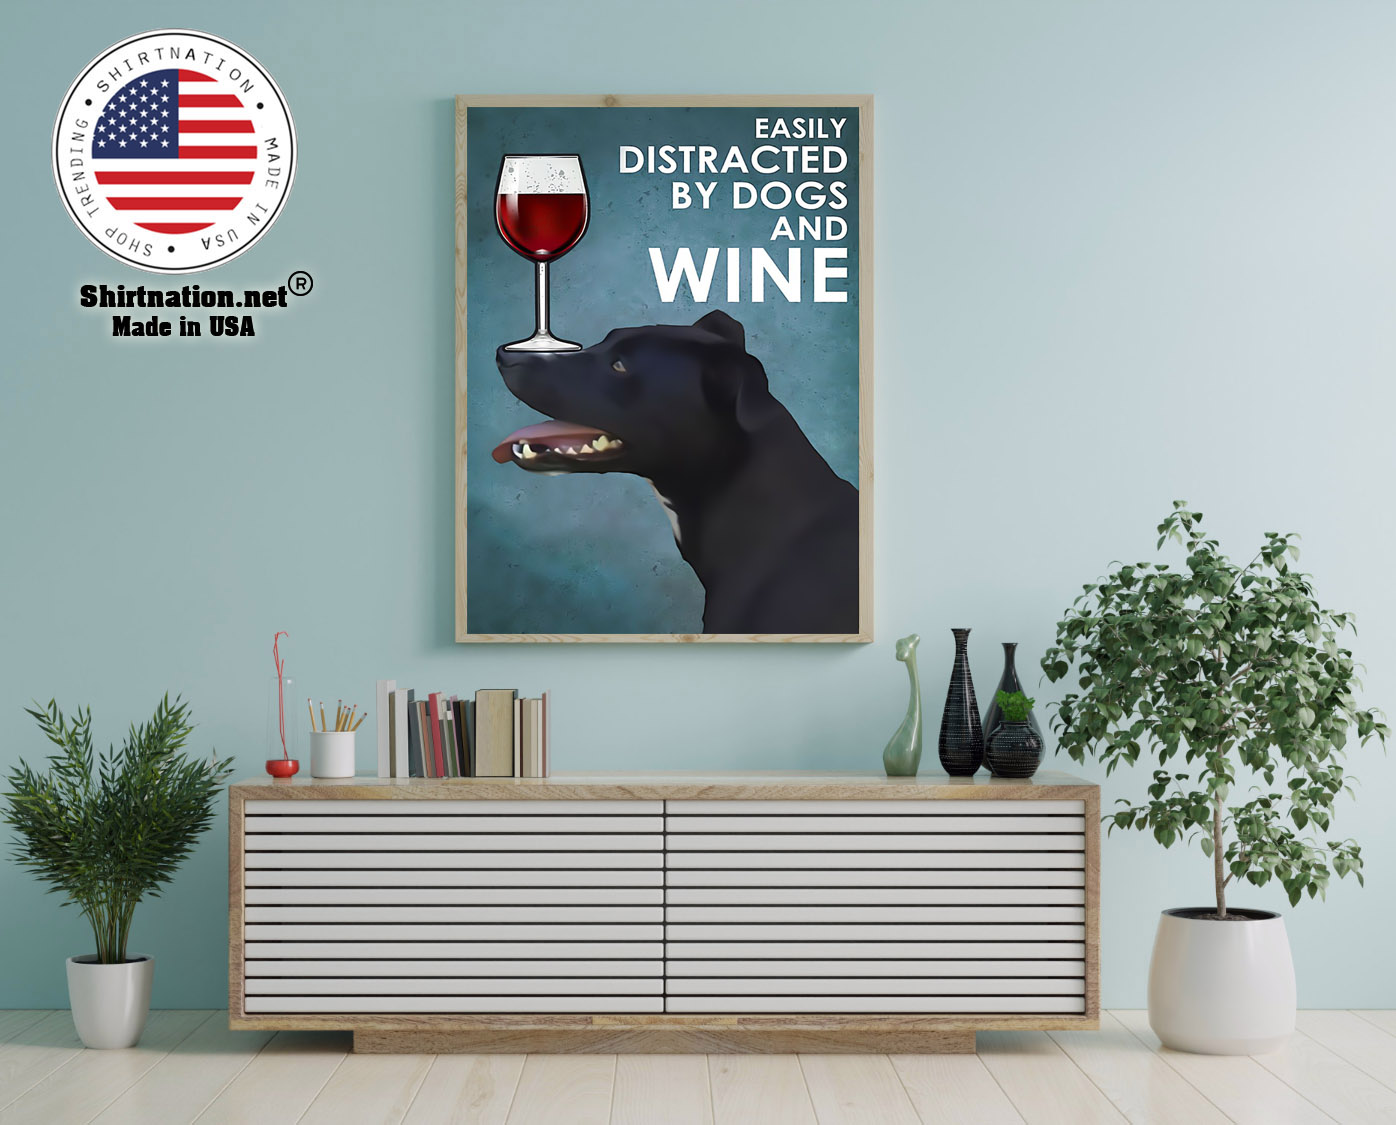 Patterdale terrier easily distracted by dogs and wine poster